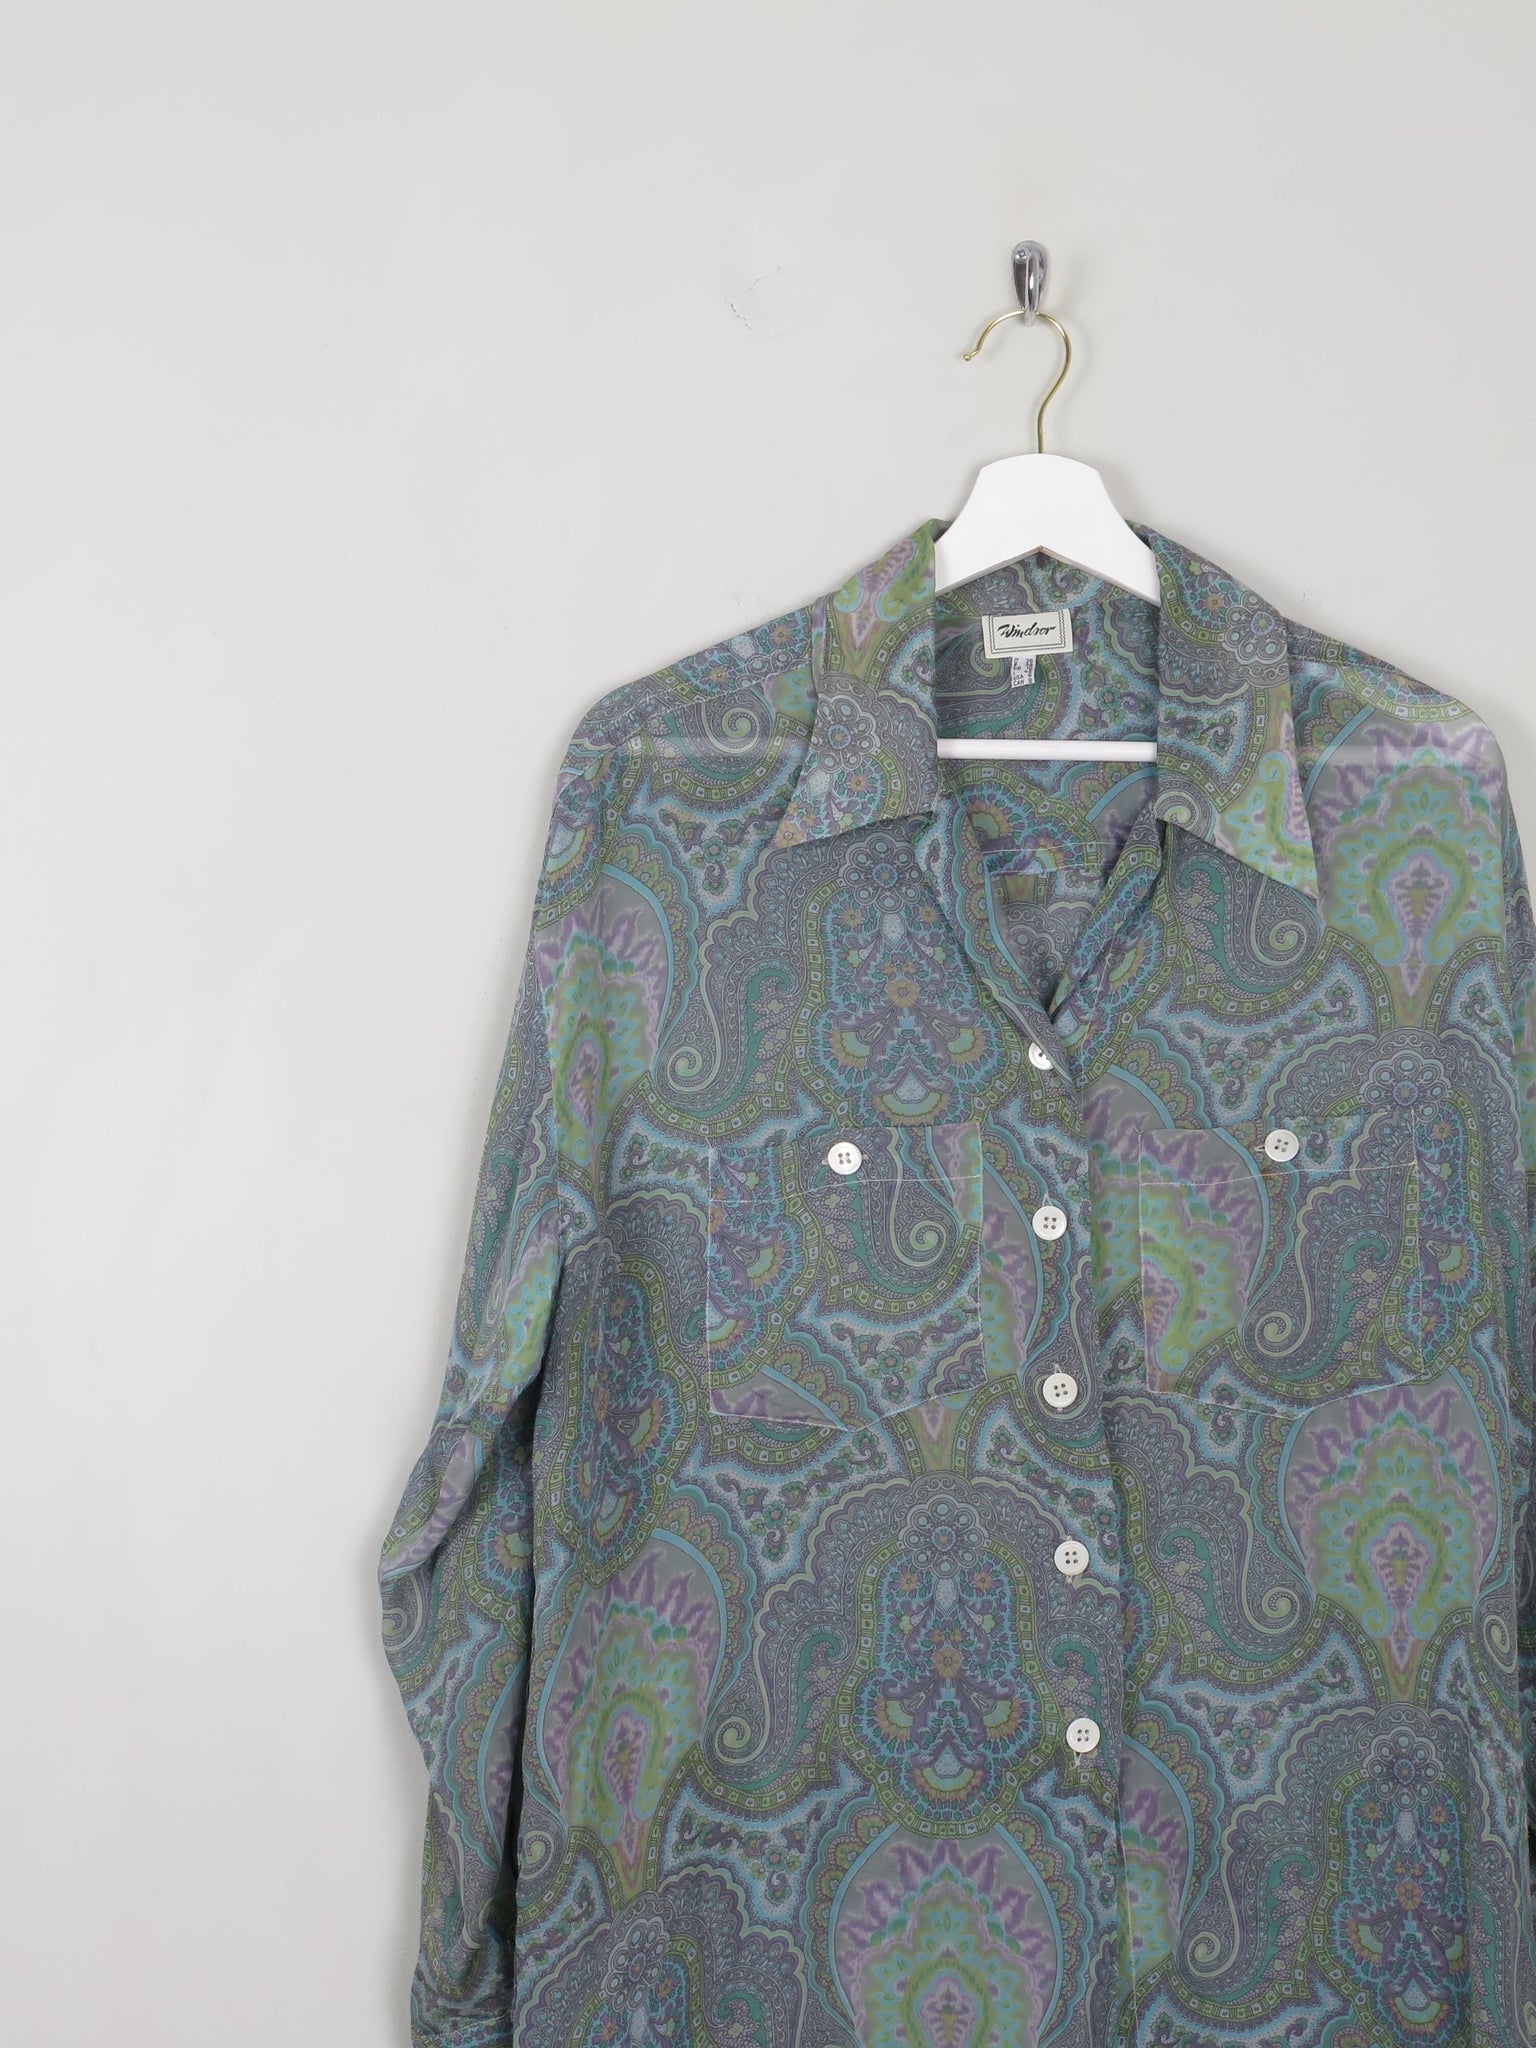 Women's Vintage Silk Paisley Blouse With Collar S/M/L - The Harlequin